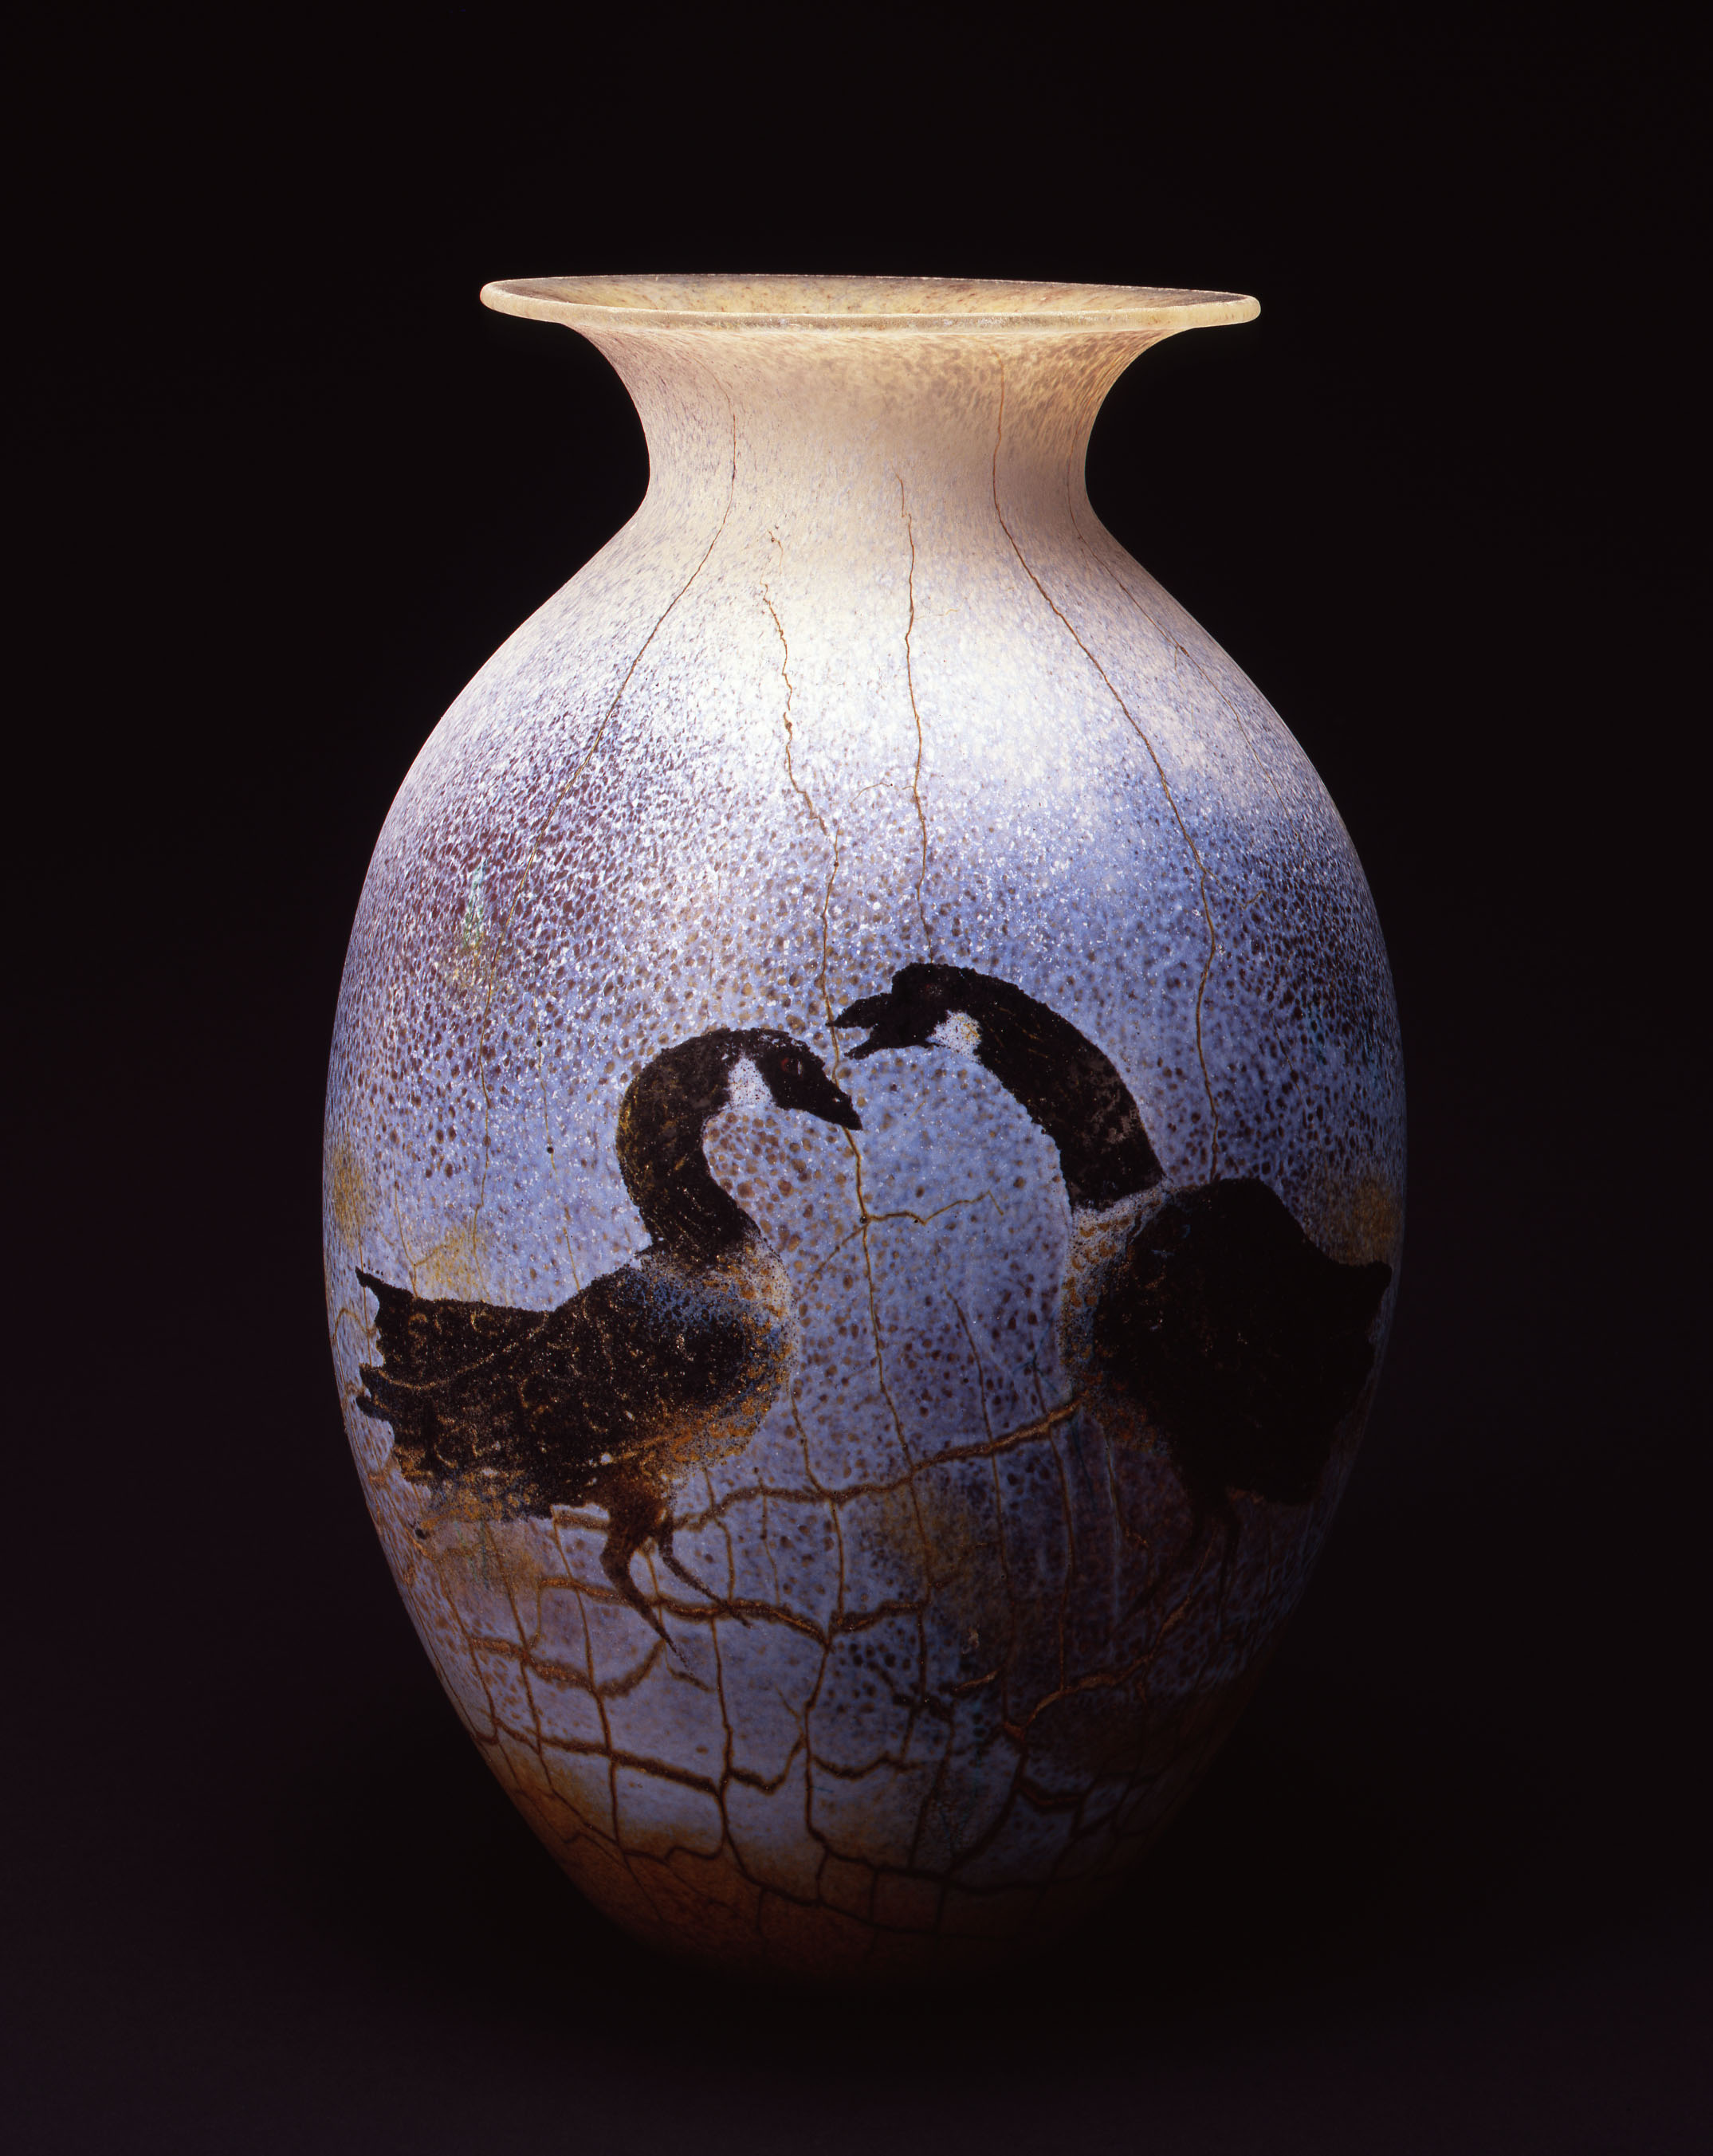  William Morris,  Vessel with Greater Canada Geese&nbsp; (2004, glass, 16 1/2 x 10 3/4 x 10 3/4 inches), WM.37 